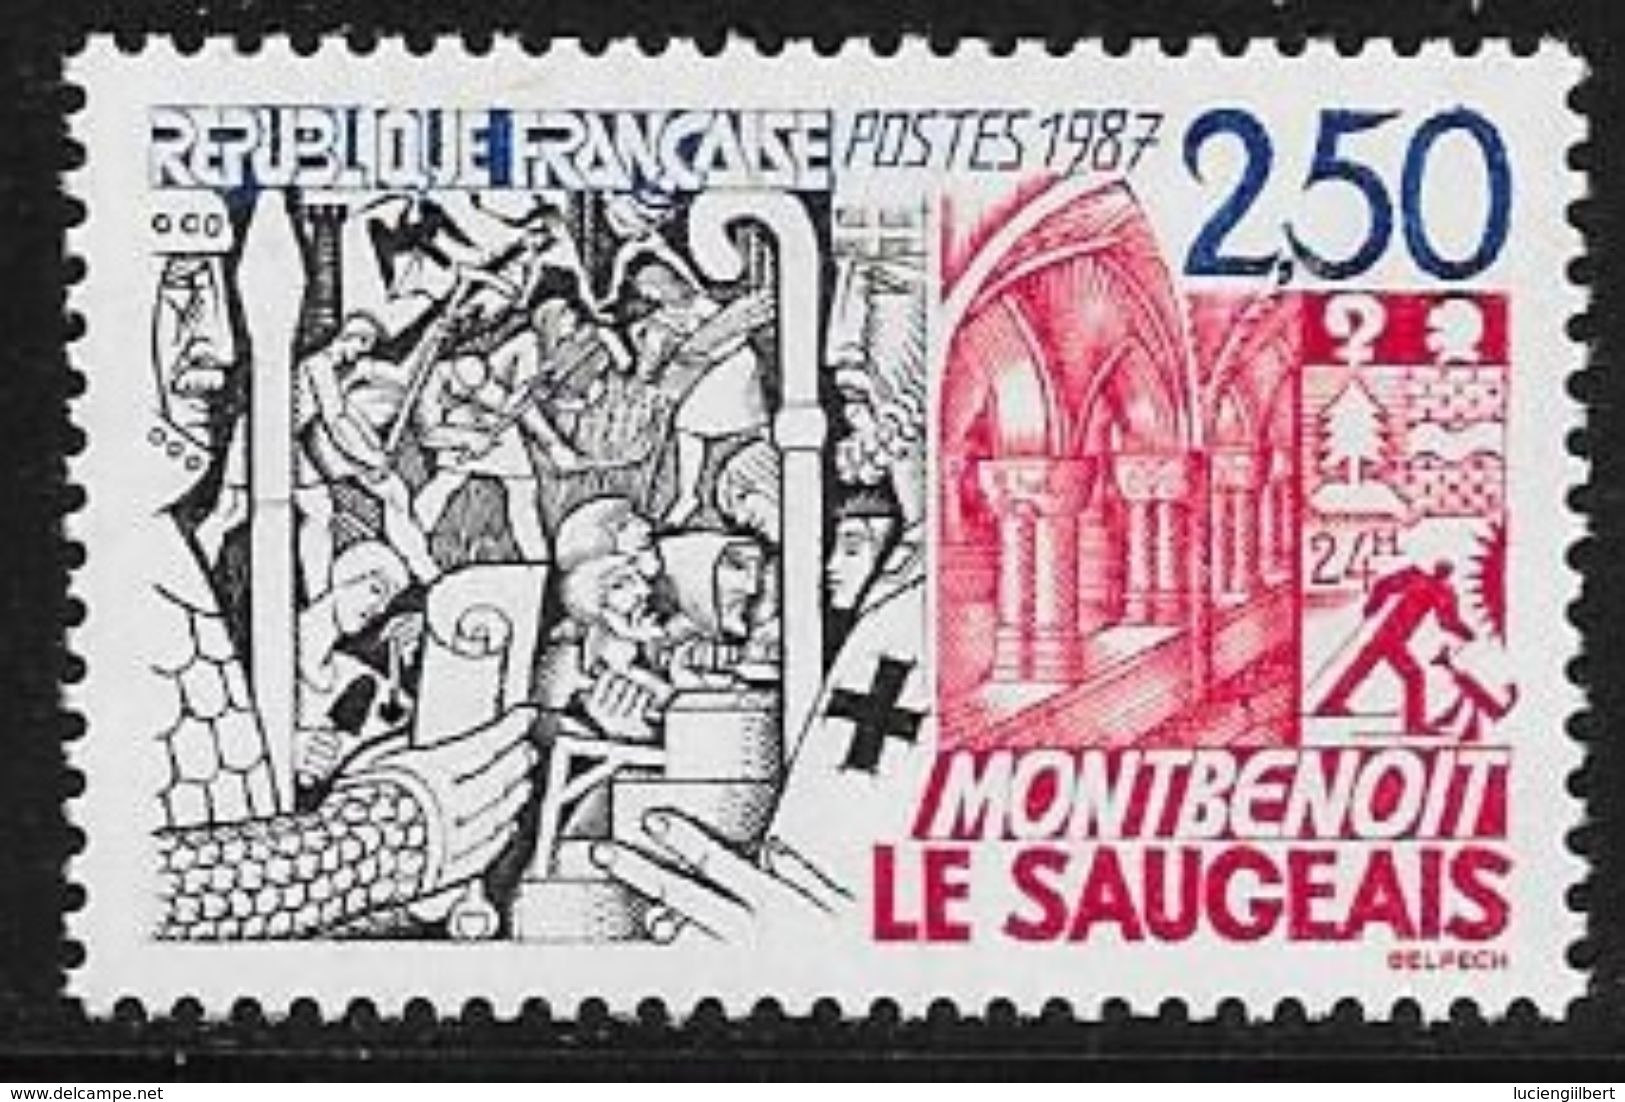 TIMBRE N° 2495  FRANCE -  MONTBENOIT   - NEUF  -  1987 - Unused Stamps